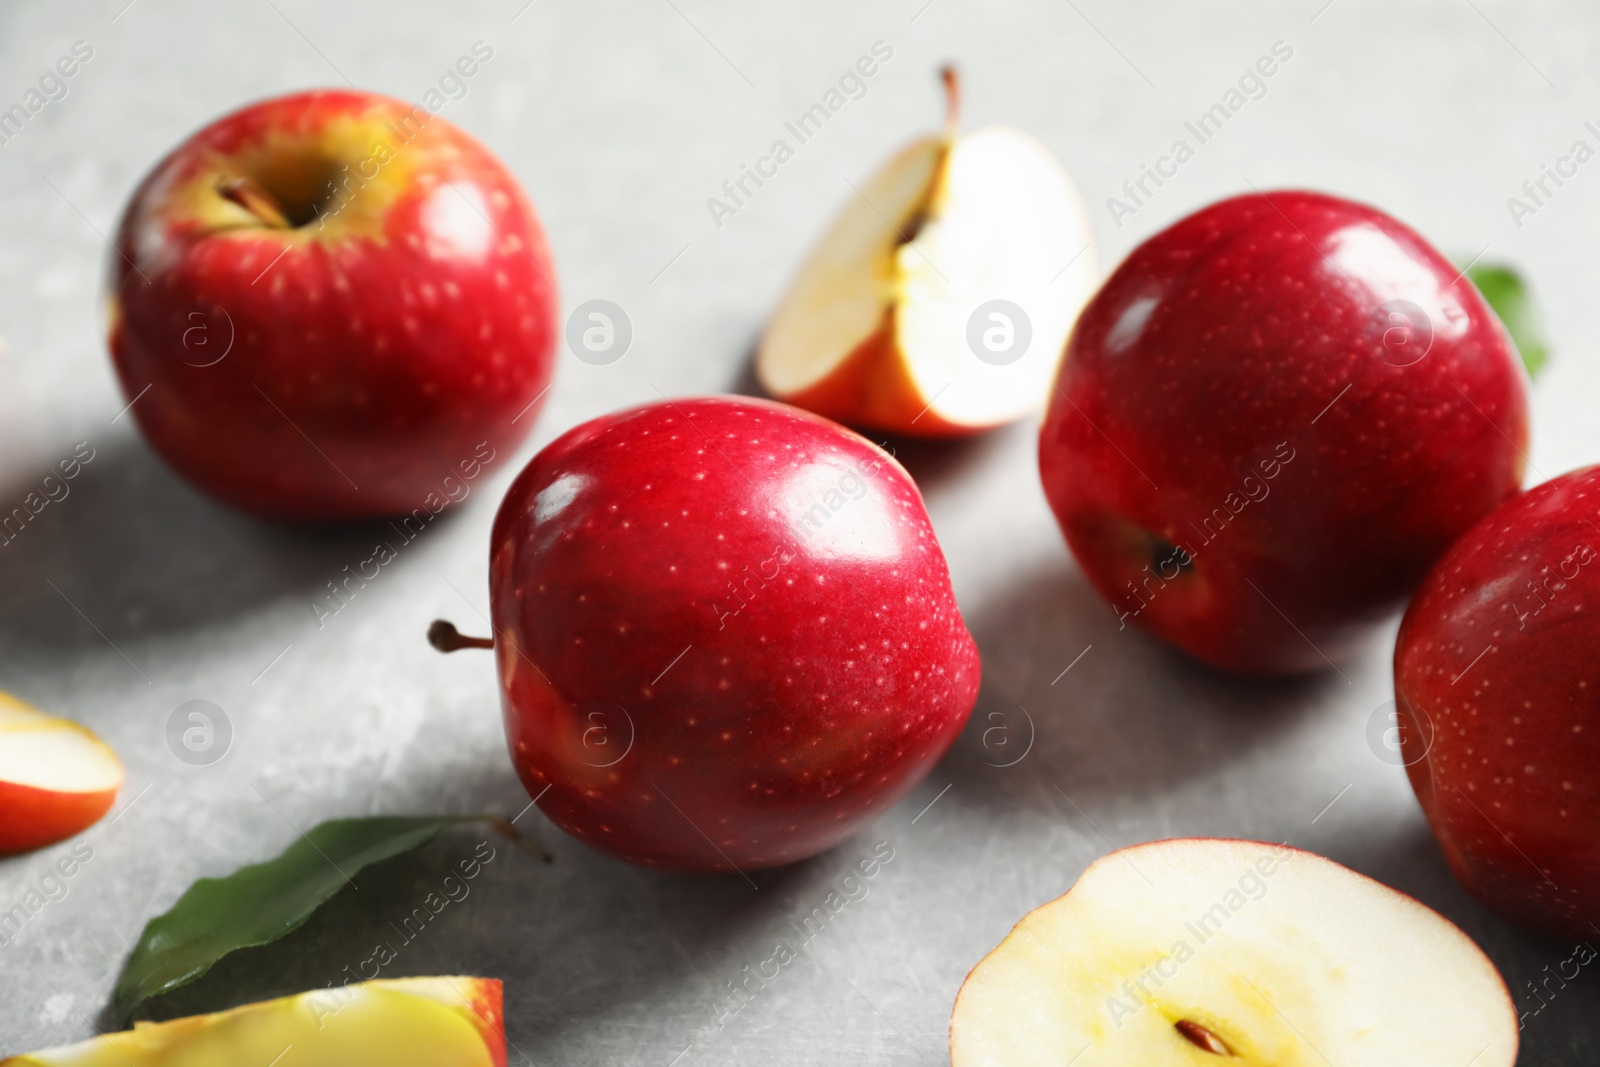 Photo of Fresh ripe red apples on light grey background